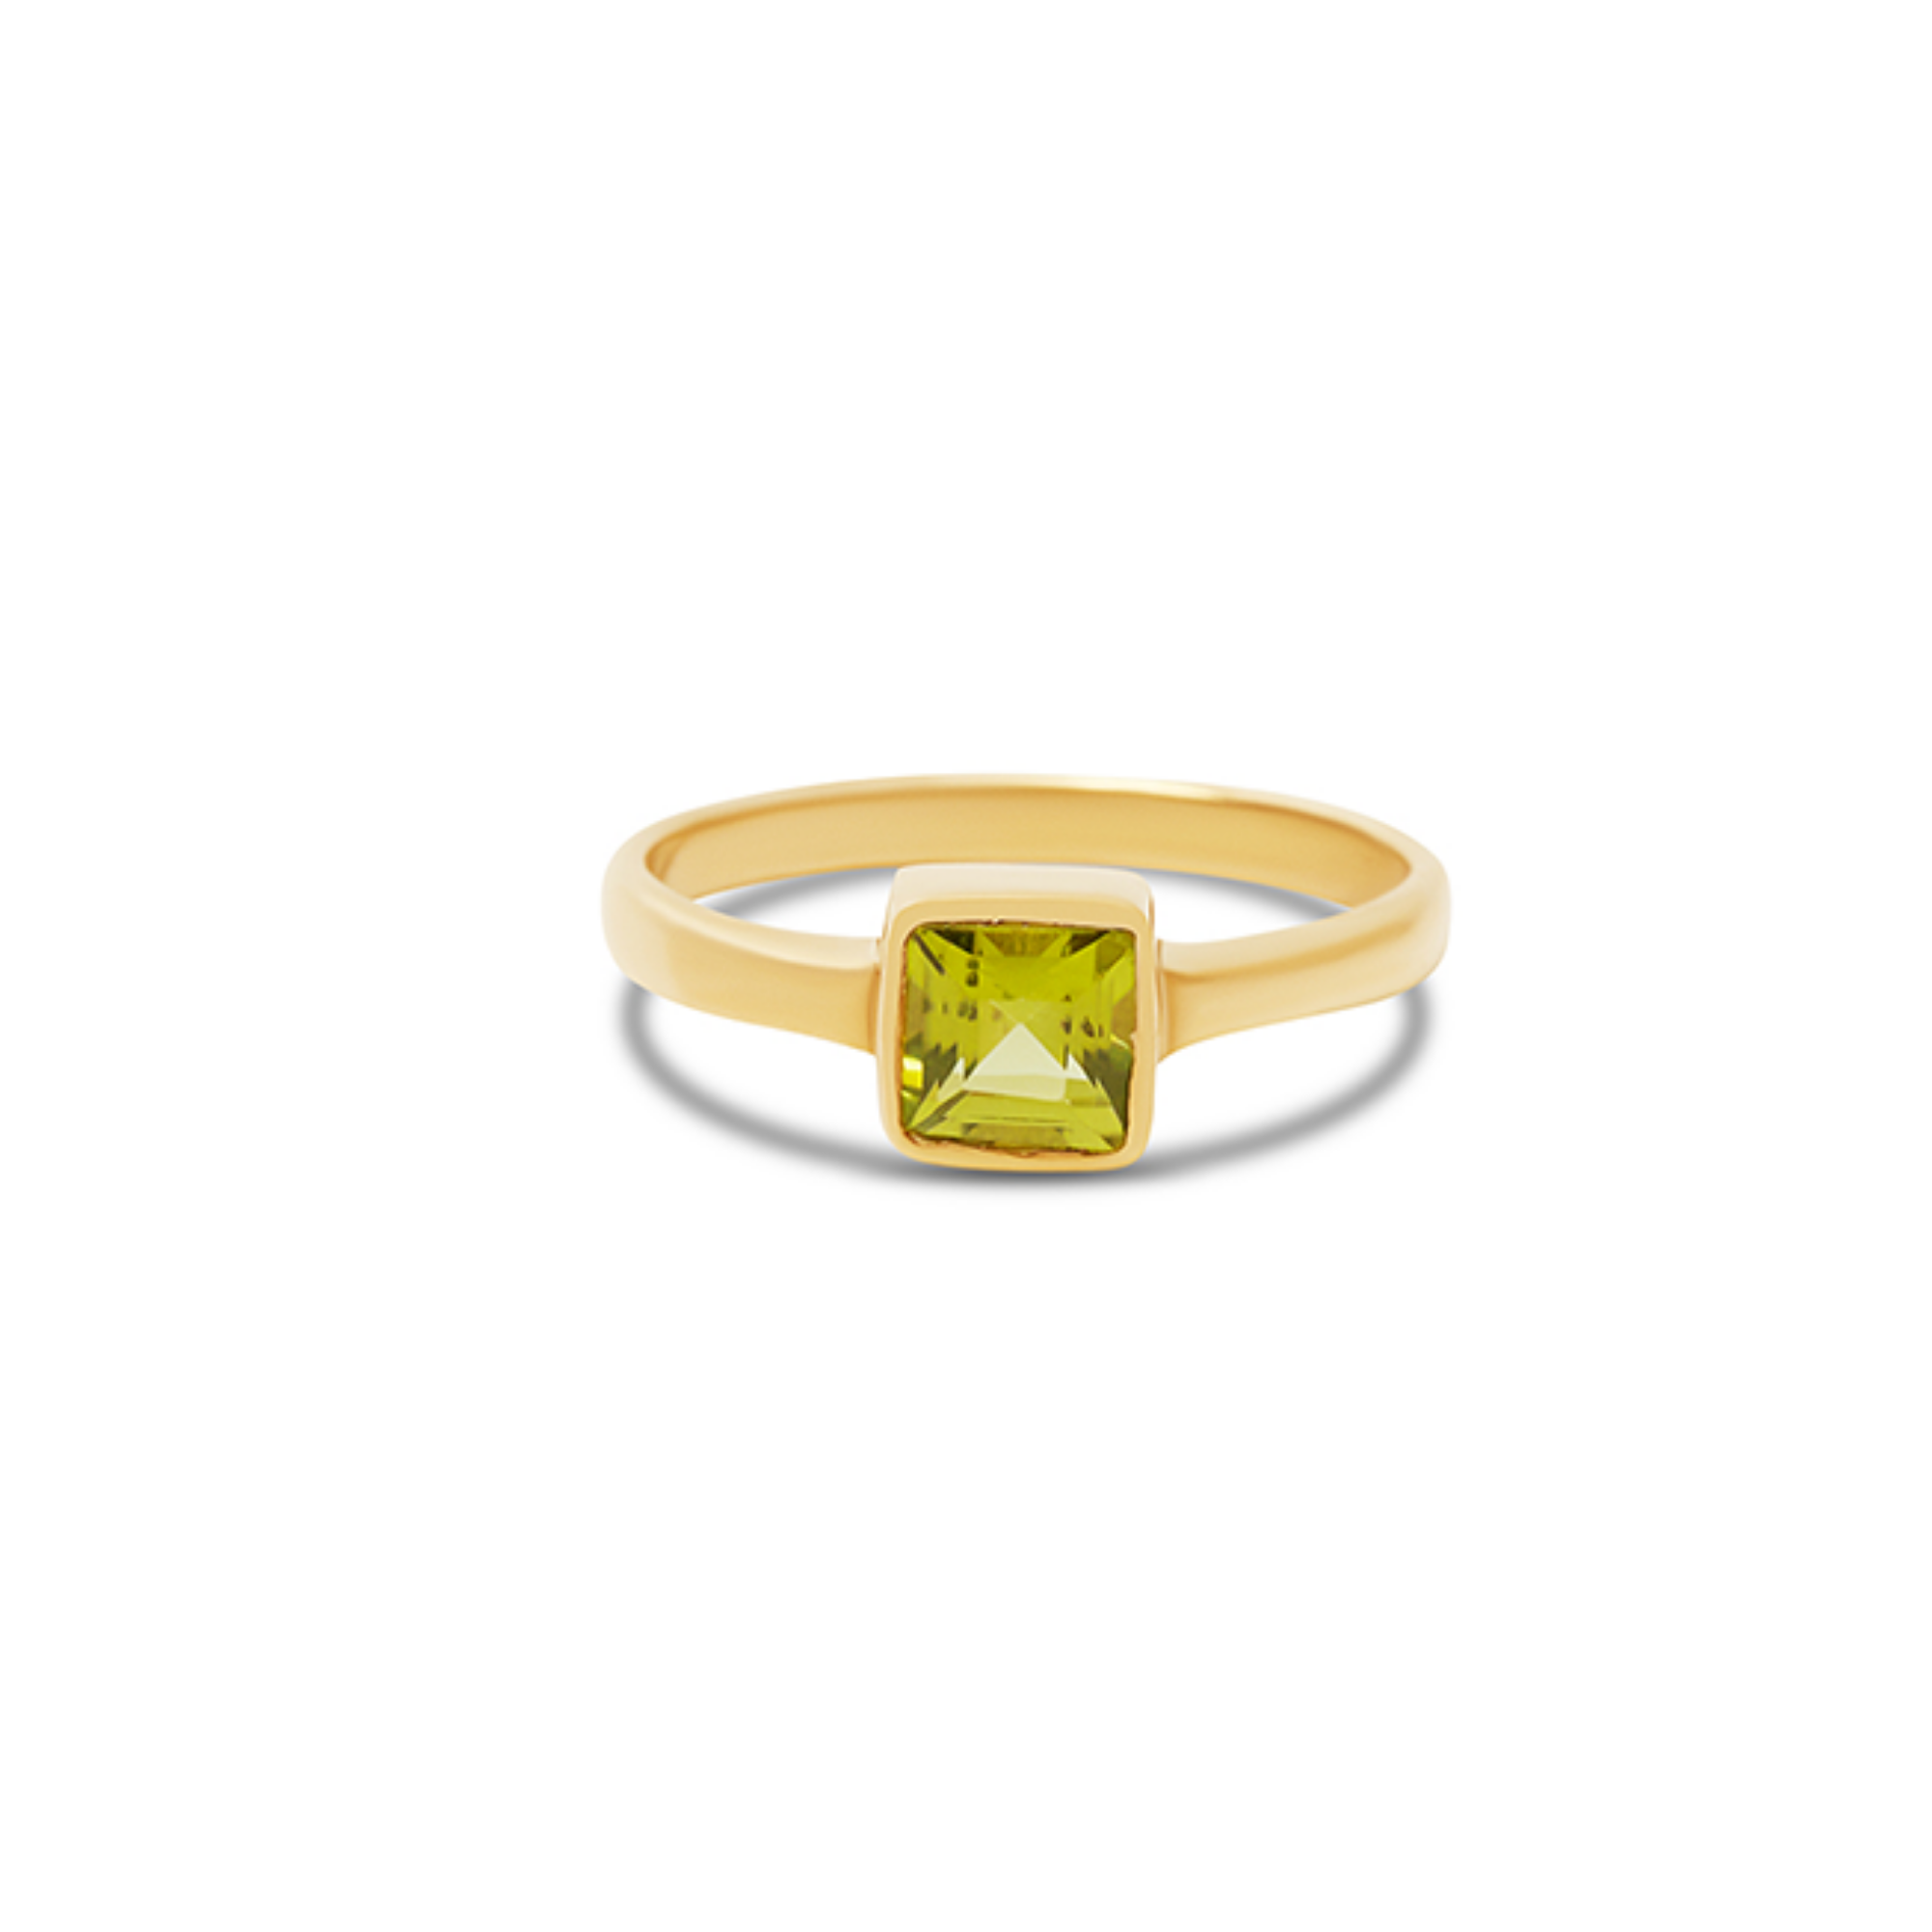 THE DAINTY SQUARE GEMSTONE RING